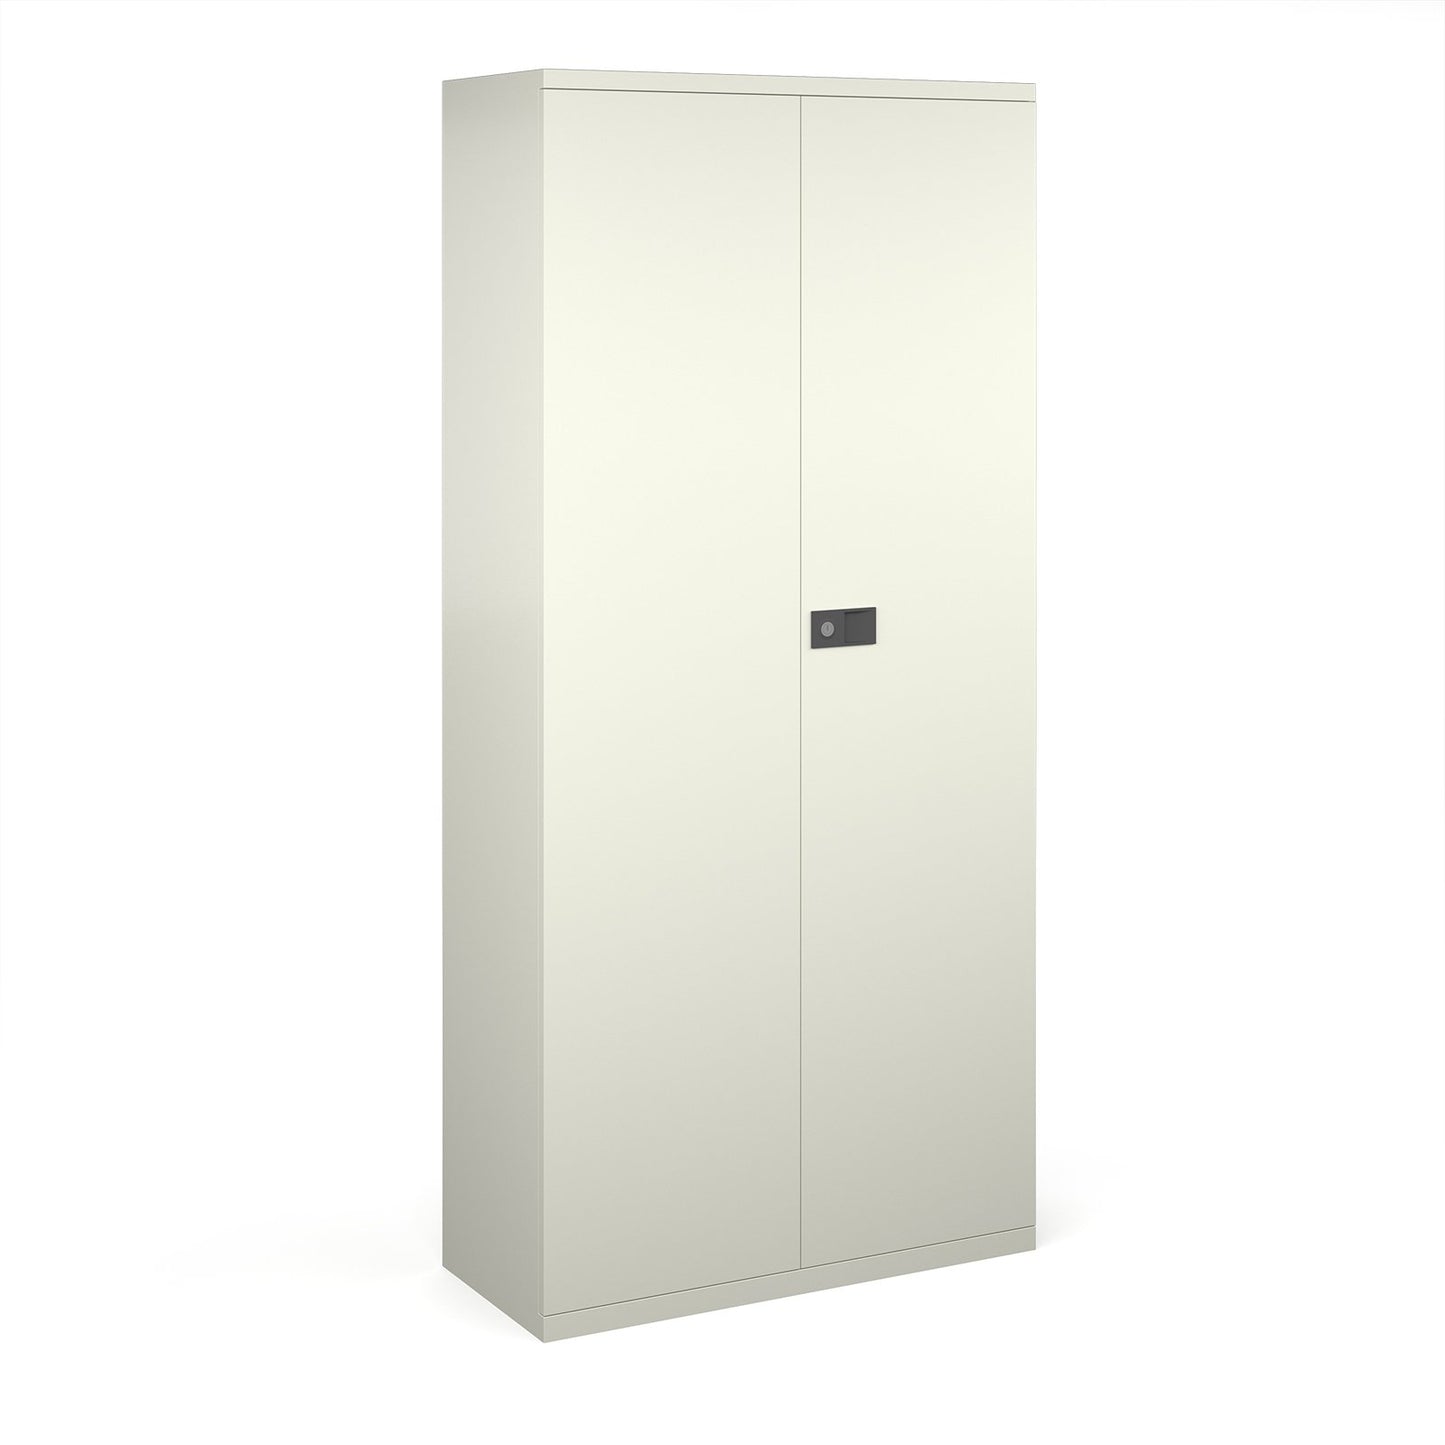 Steel Contract Cupboard 1968mm High - White